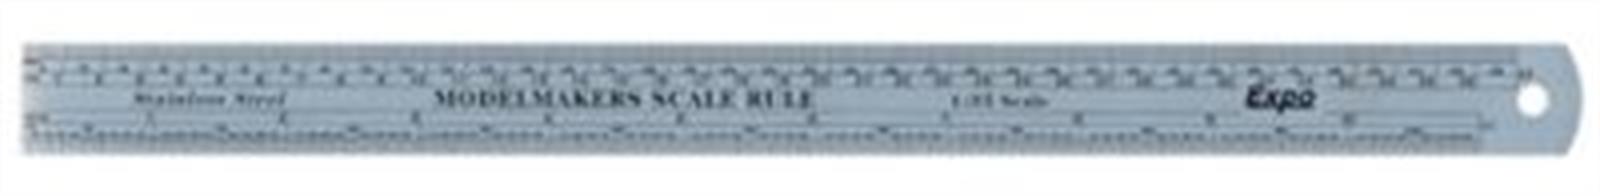 Modelmakers scale rule marked with imperial and metric measurements at 1/35th scale, frequently used for military vehicle models.Manufactured in hard chrome finish stainless steel. Rule approx 12 inches length.